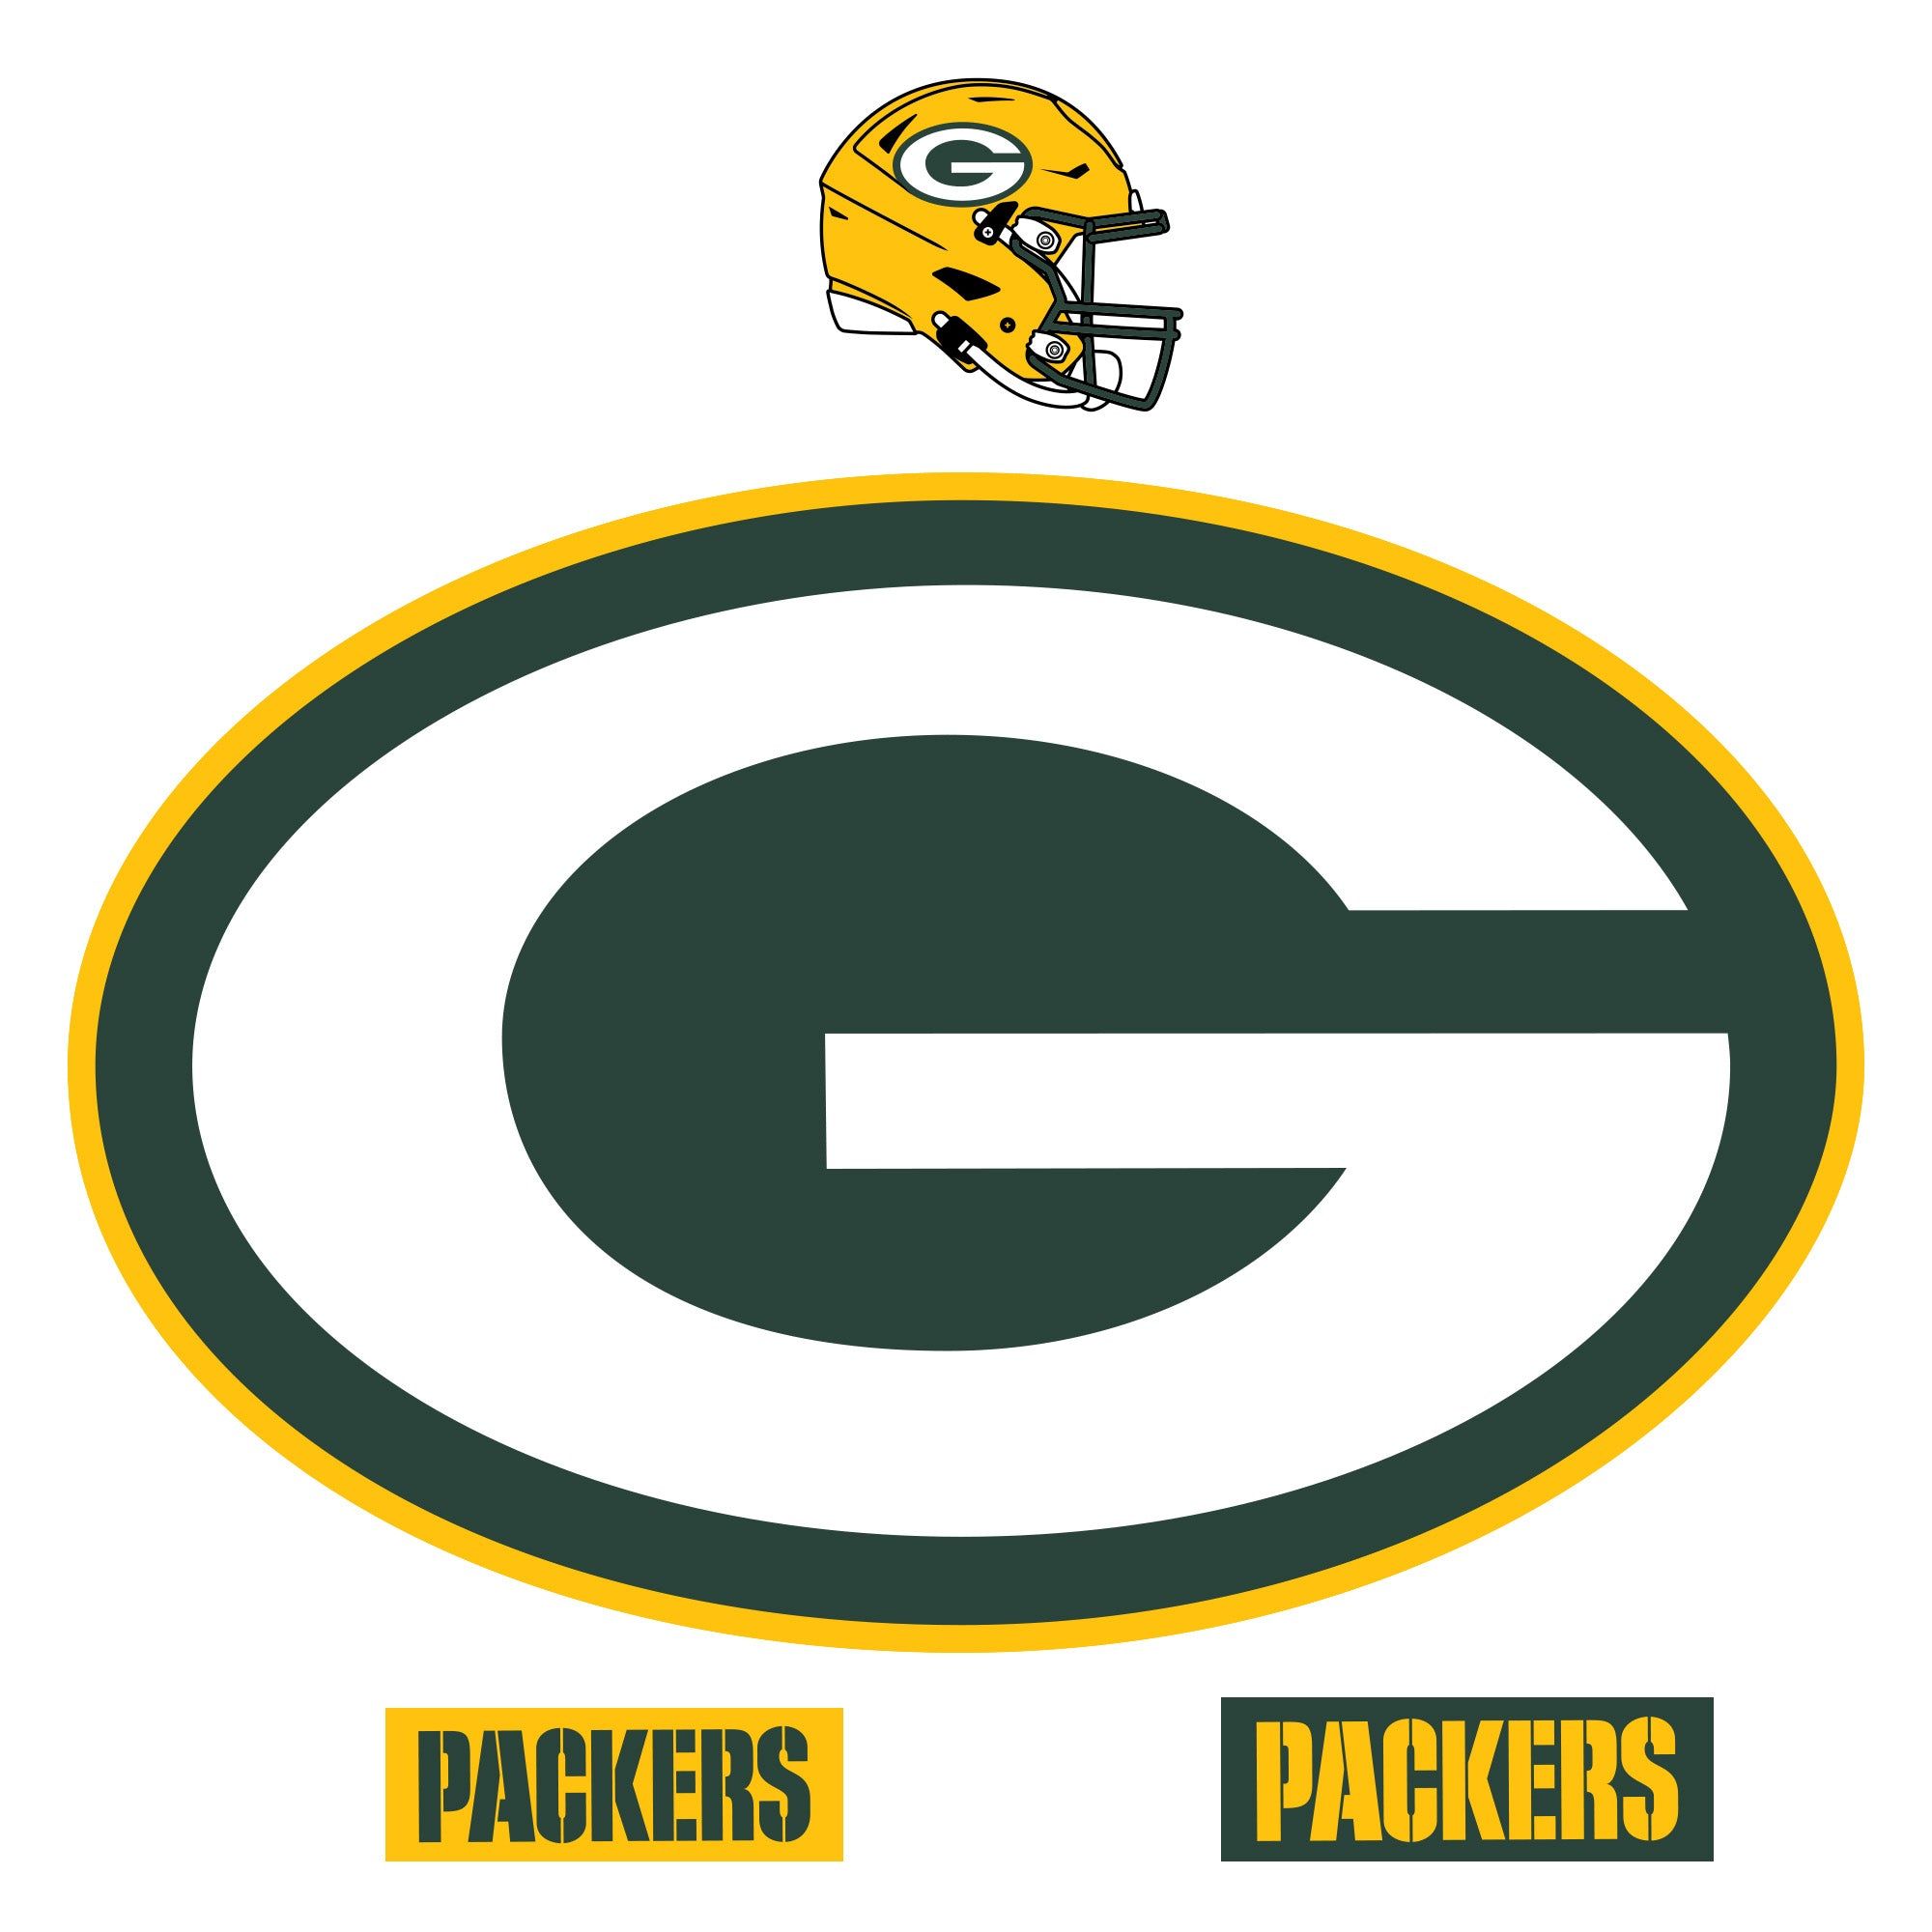 SAD NEWS: the green bay packers his suspended their superstar player due to….